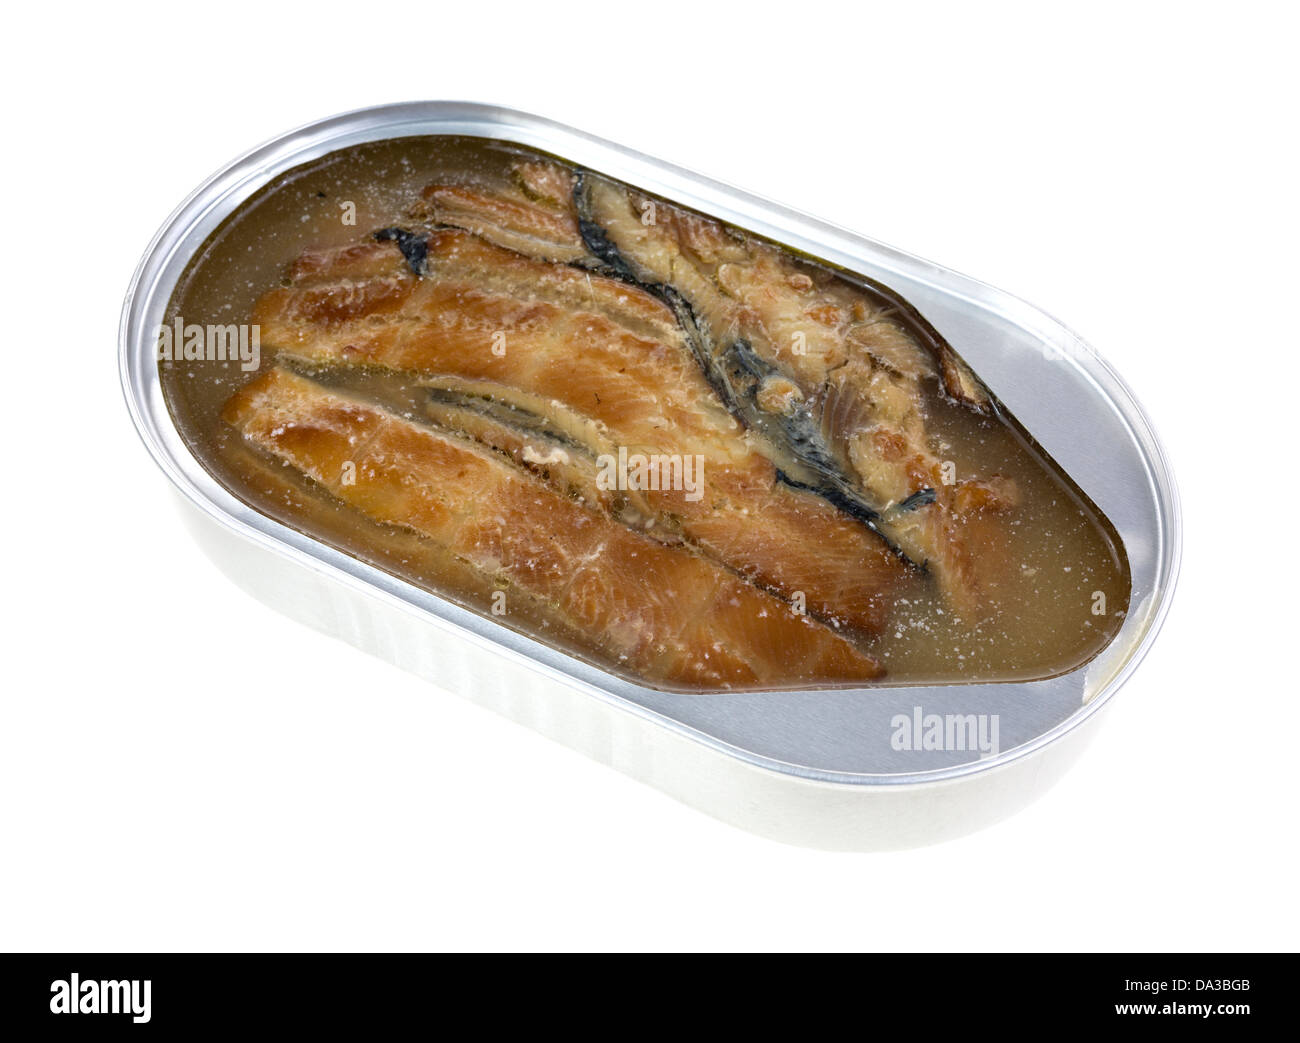 An opened tin of smoked herring fillets on a white background. Stock Photo